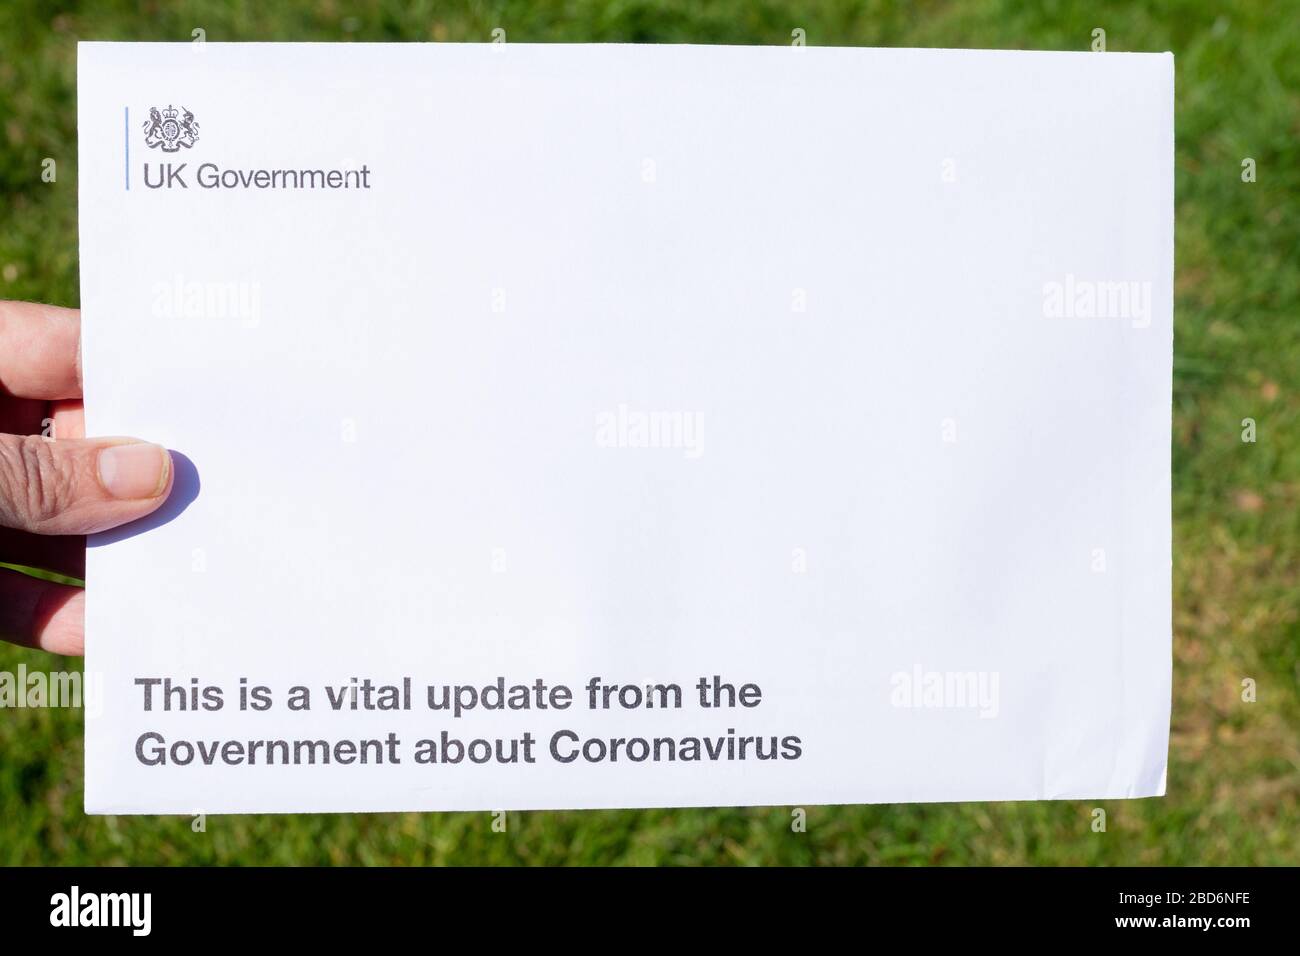 Information letter with viral update from the UK Government about the coronavirus Covid-19 pandemic Stock Photo